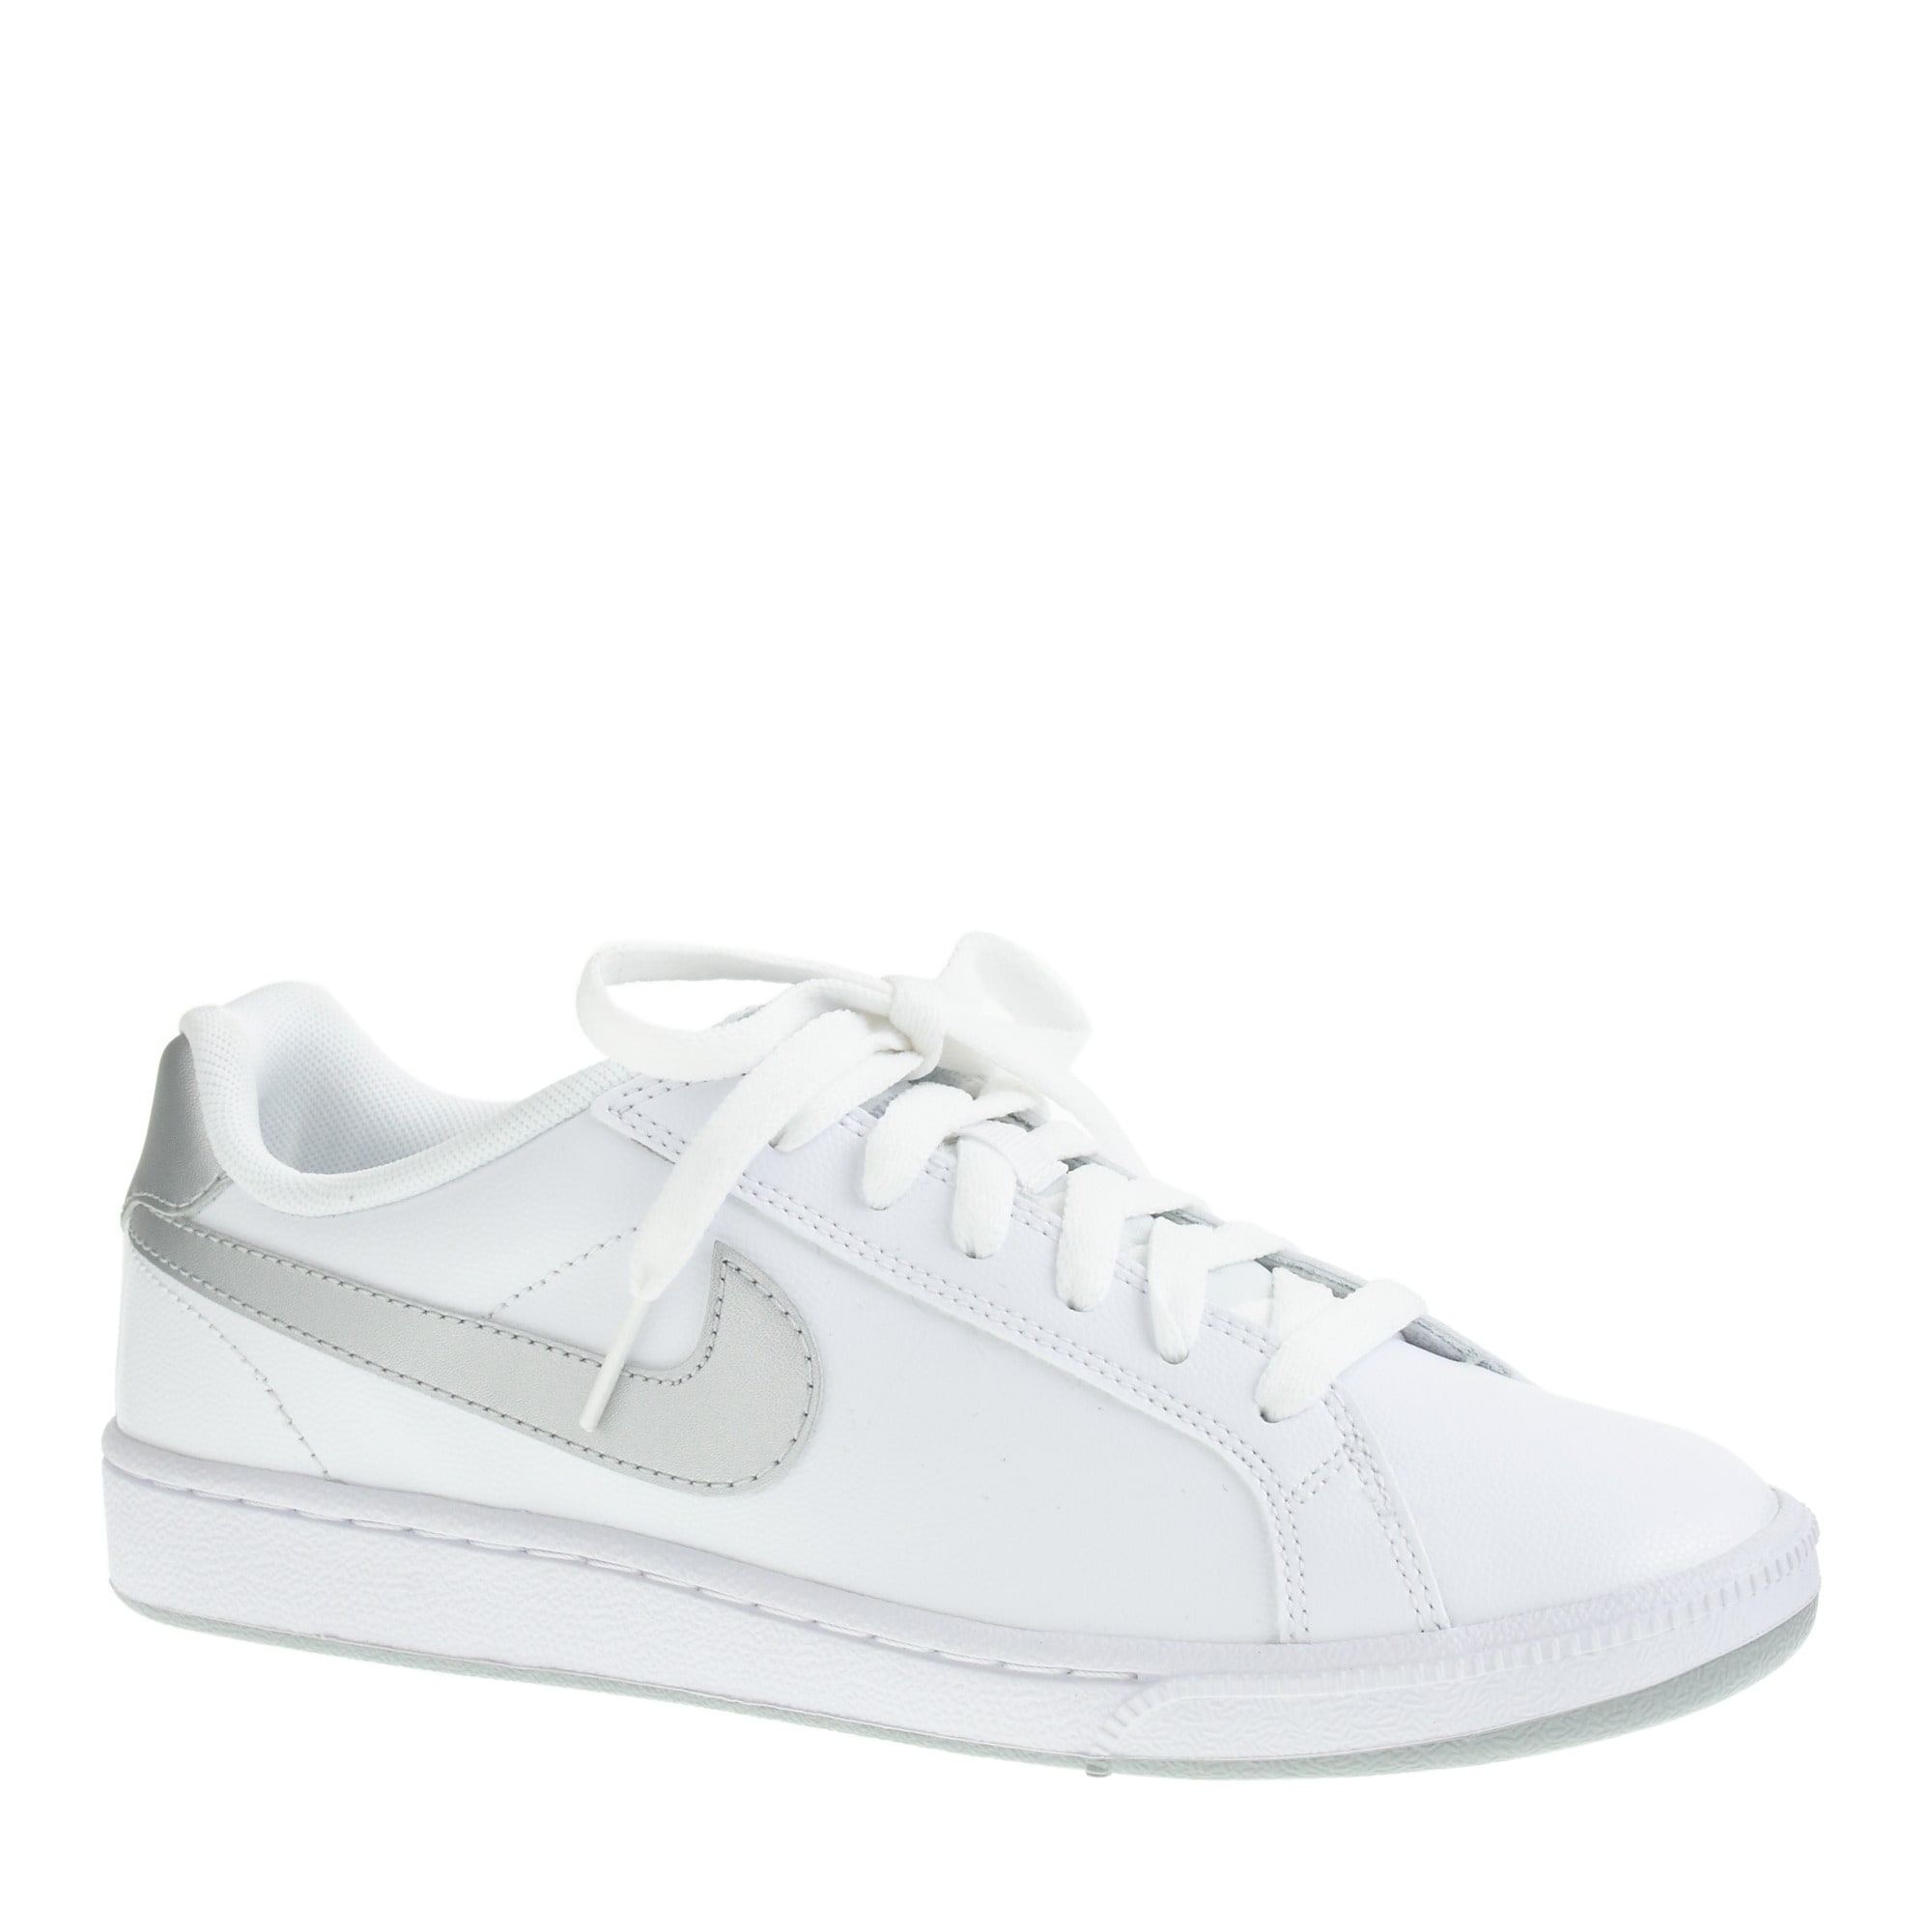 nike court majestic shoes